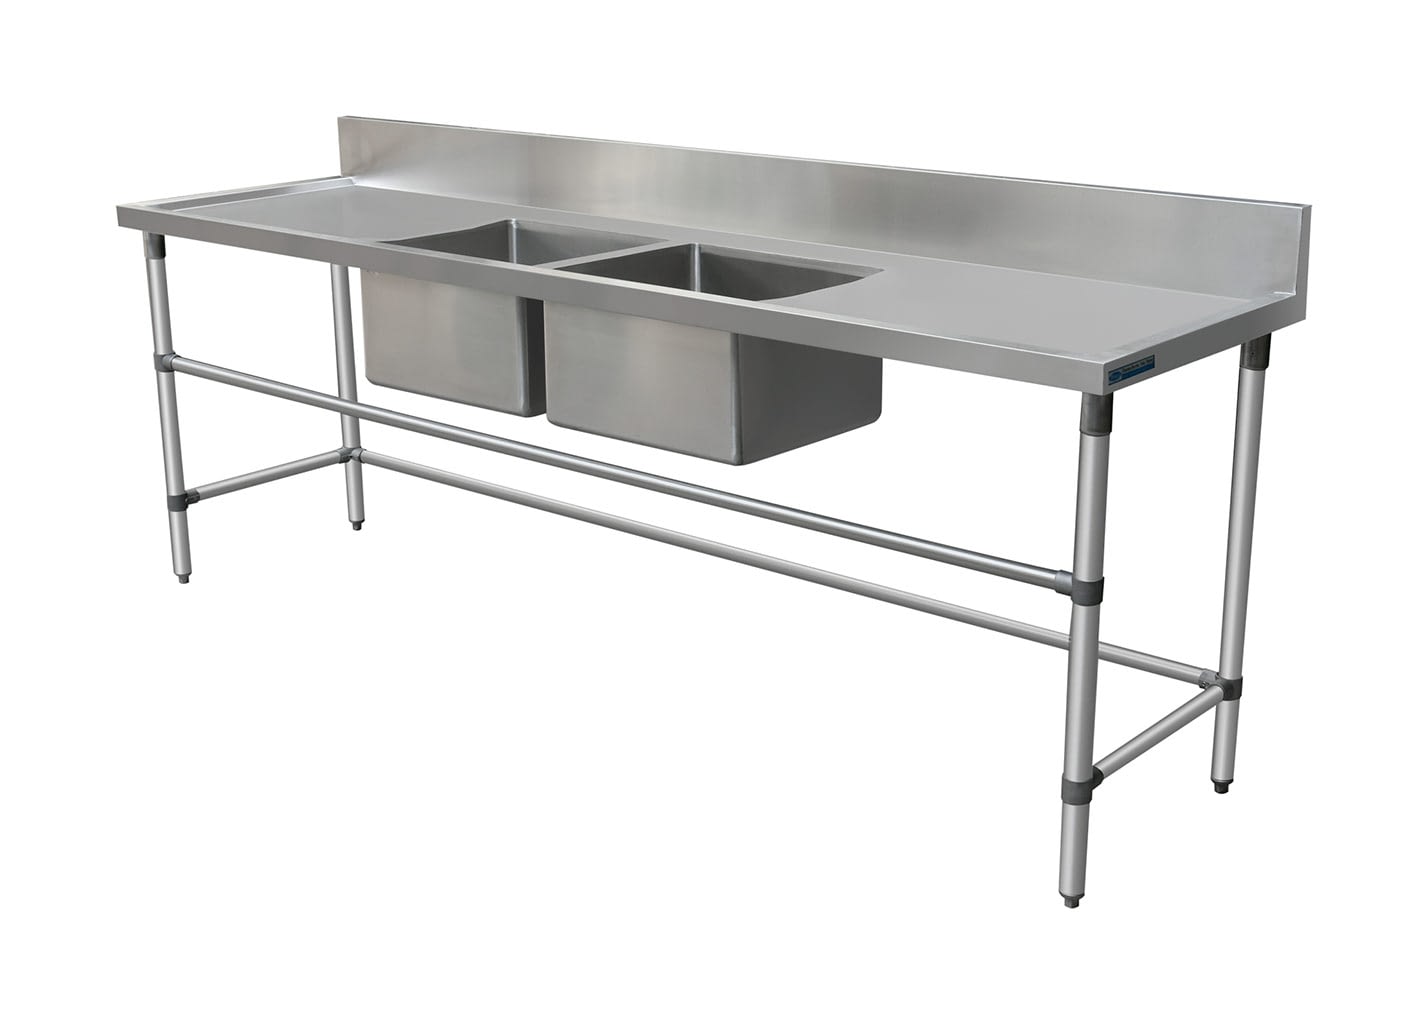 Double Stainless Sink – Right And Left Bench, 2590 x 700 x 900mm high